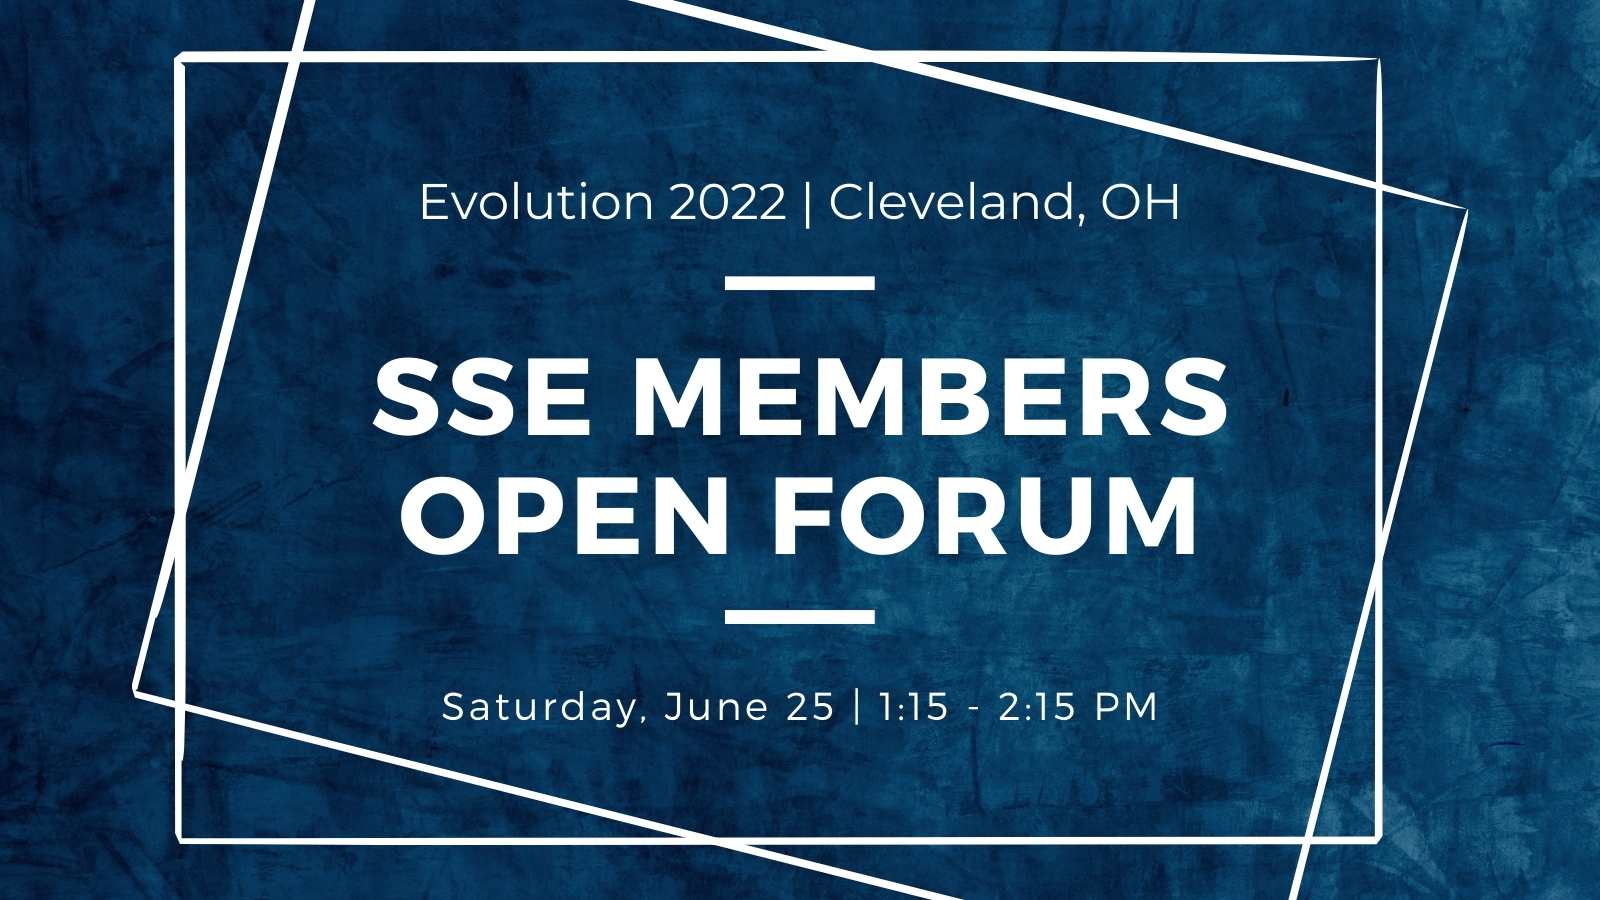 A mottled blue background with white offset rectangles framing text. Text: Evolution 2022 Cleveland, OH. SSE Members Open Forum, Saturday June 25, 1:15 - 2:15 PM.